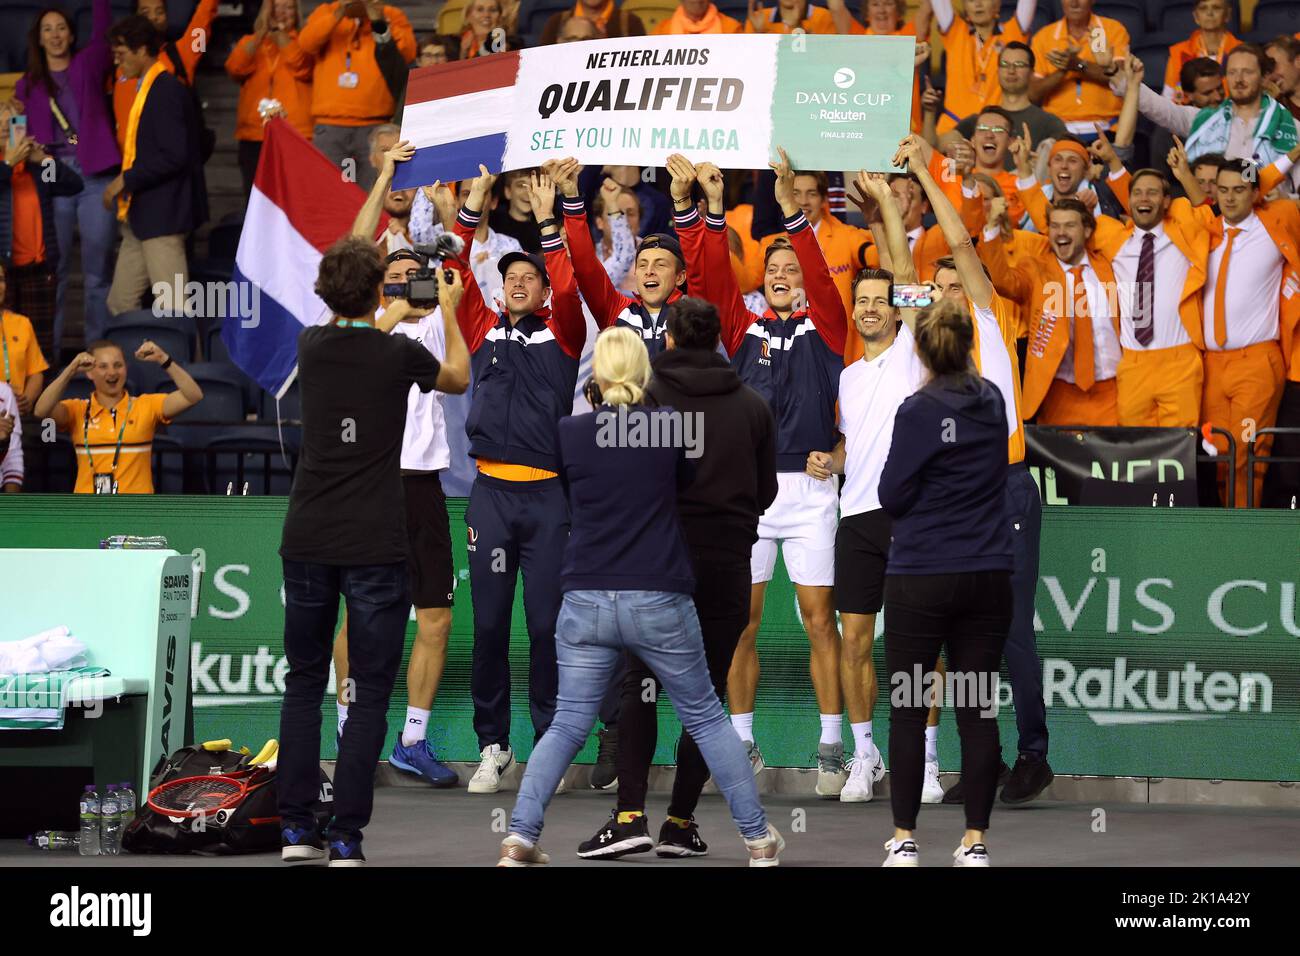 Netherlands' Botic Van de Zandschulp, Tallon Griekspoor, Tim Van Rijthoven, Wesley Koolhof, Matwe Middelkoop and coach Paul Haarguis (right) celebrates qualifying for the next round of the Davis Cup by Rakuten 2022 after the group stage matches against Great Britain at the Emirates Arena, Glasgow. Stock Photo